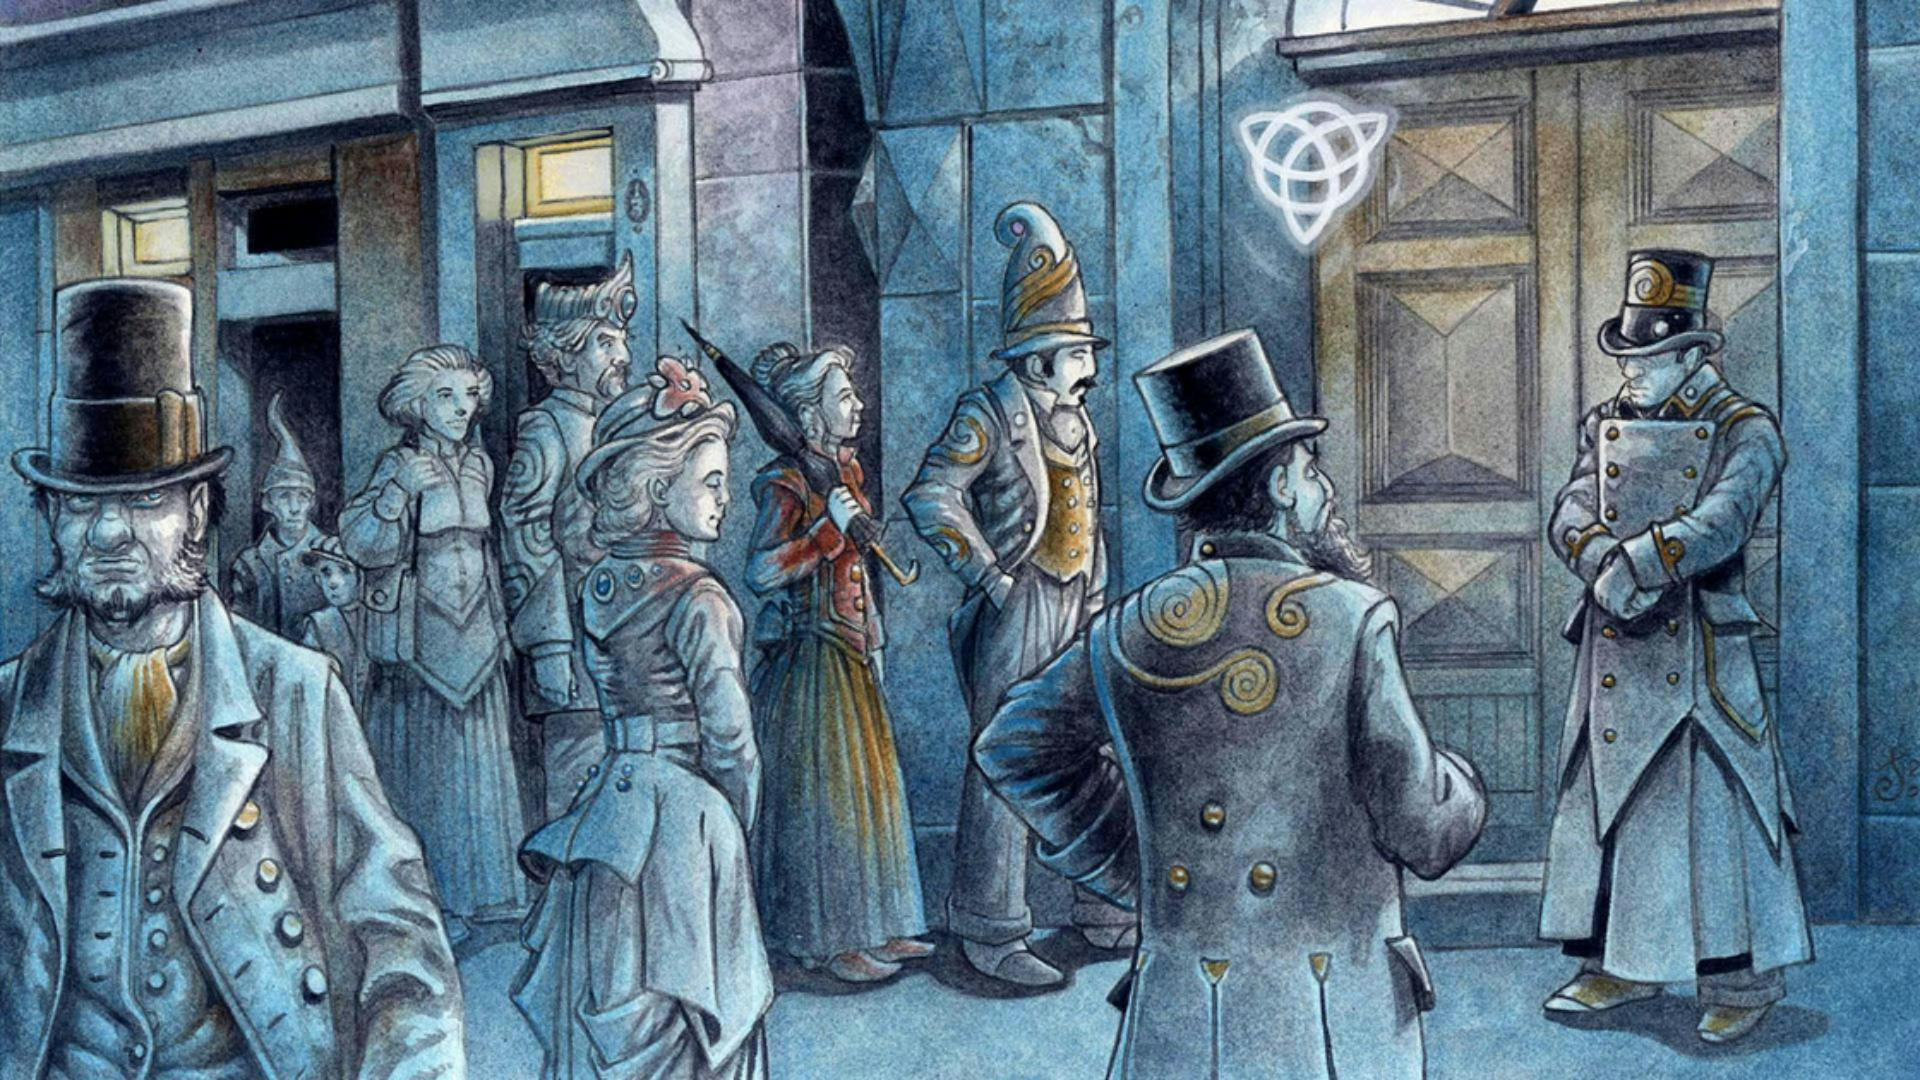 Ankh-Morpork's Underbelly: A Discworld Blades in the Dark campaign